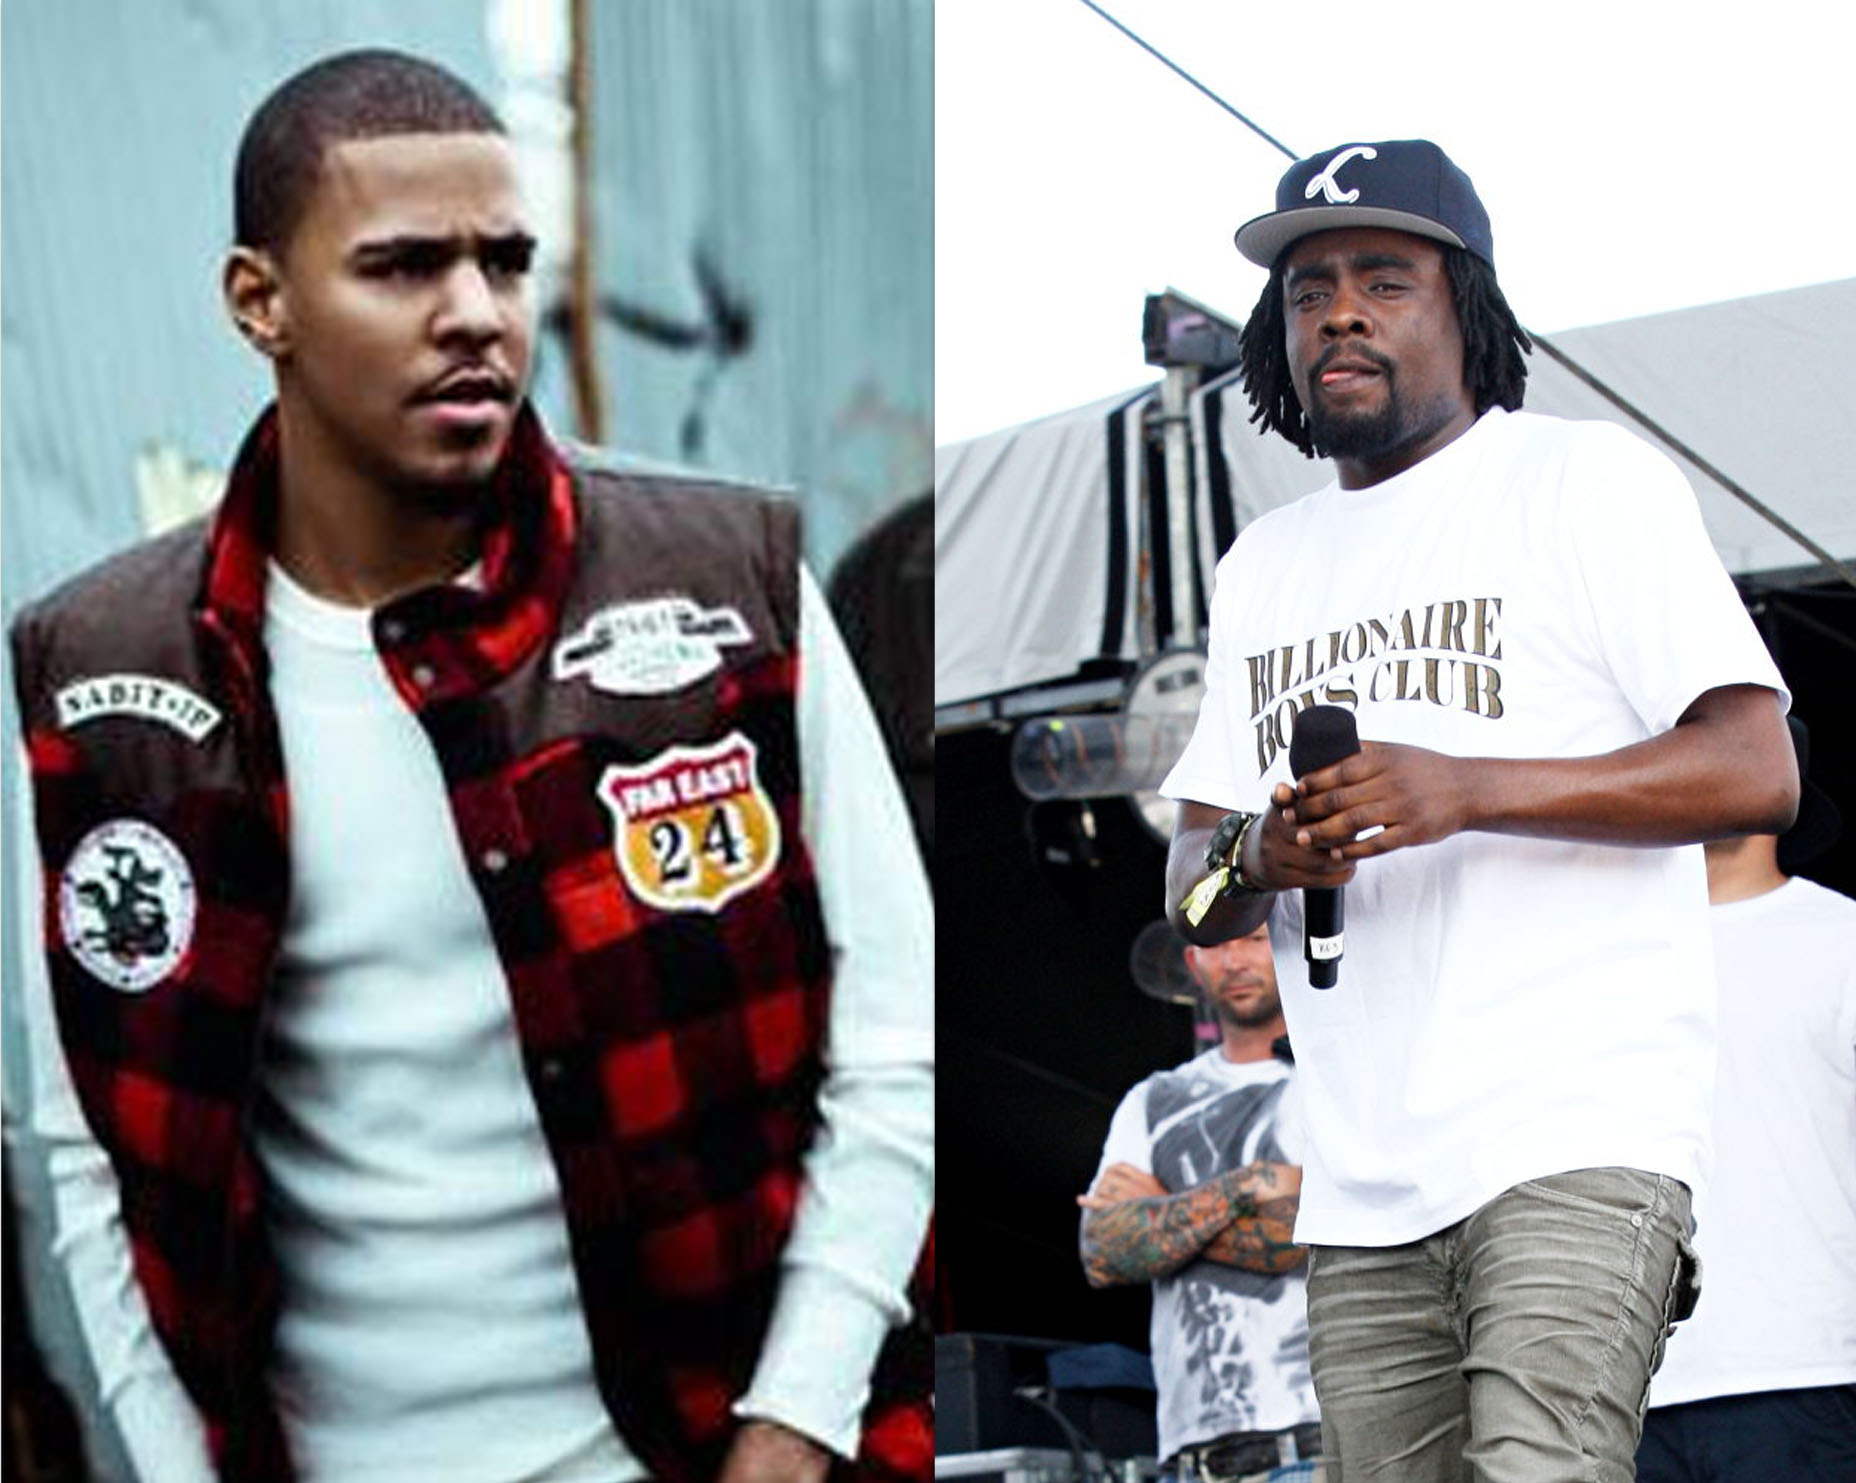 J. Cole & Wale - "Winter Schemes" (Produced by Jake One)